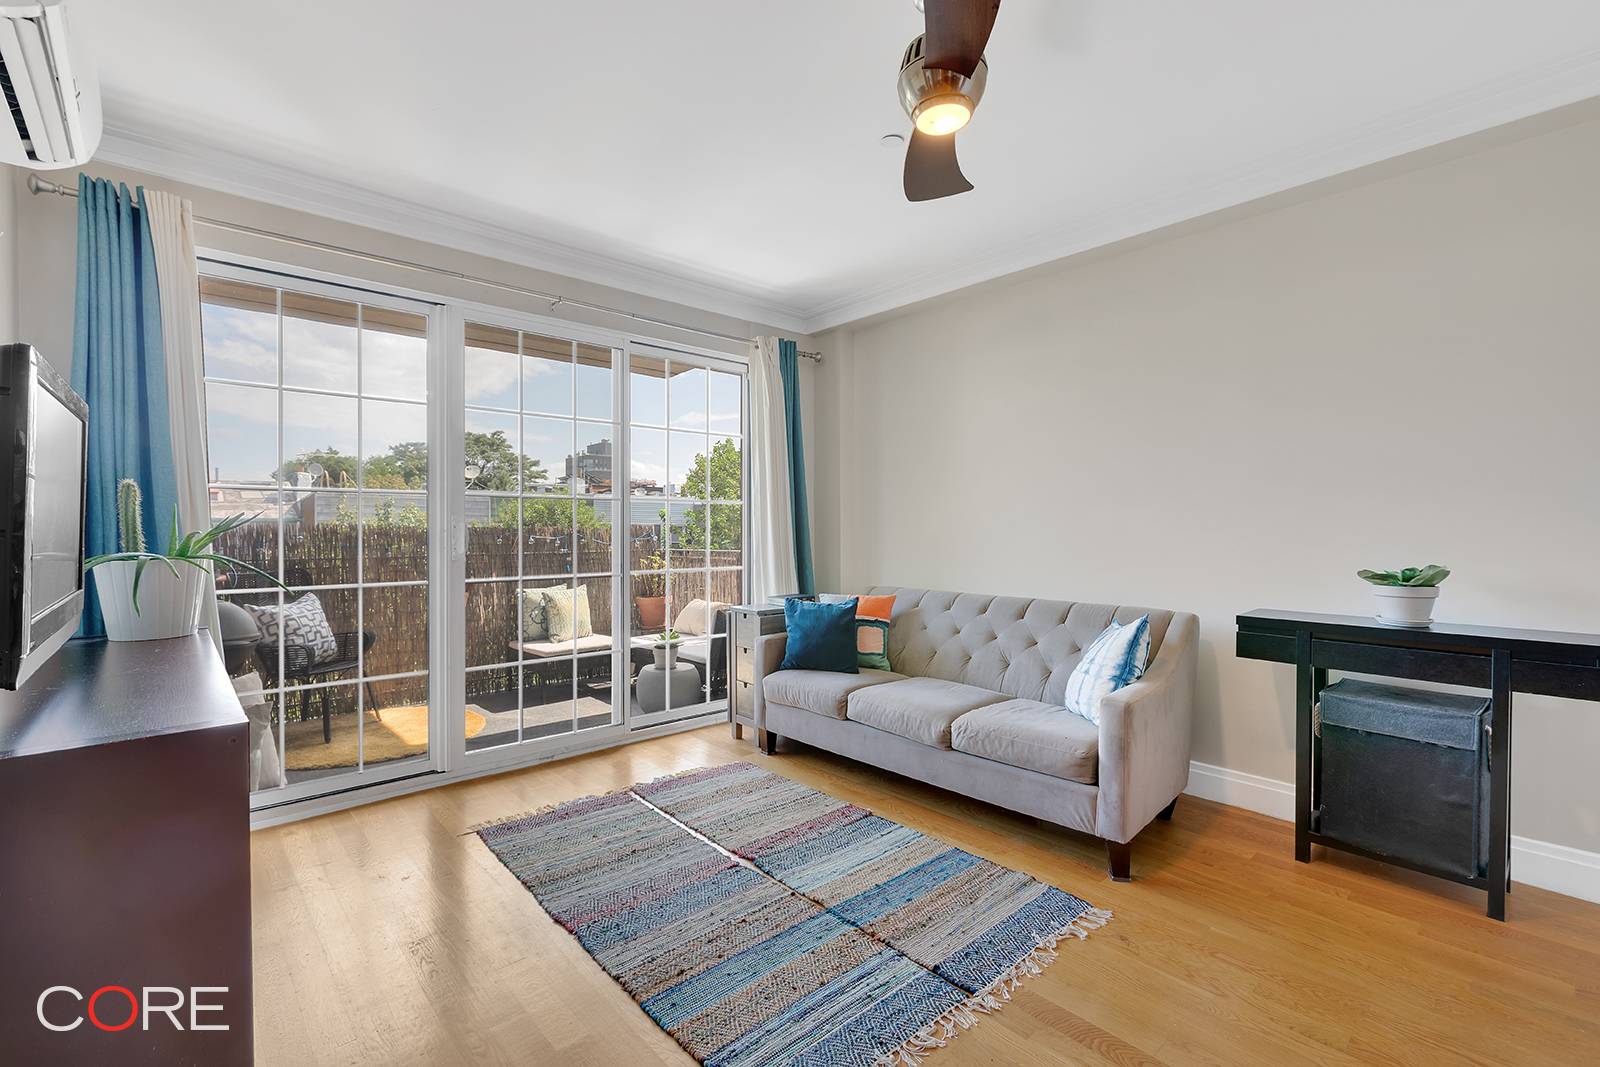 This one bedroom, one bathroom apartment has luxury finishes, a private balcony, a rooftop garden, and beautiful north facing views of Manhattan and Brooklyn.